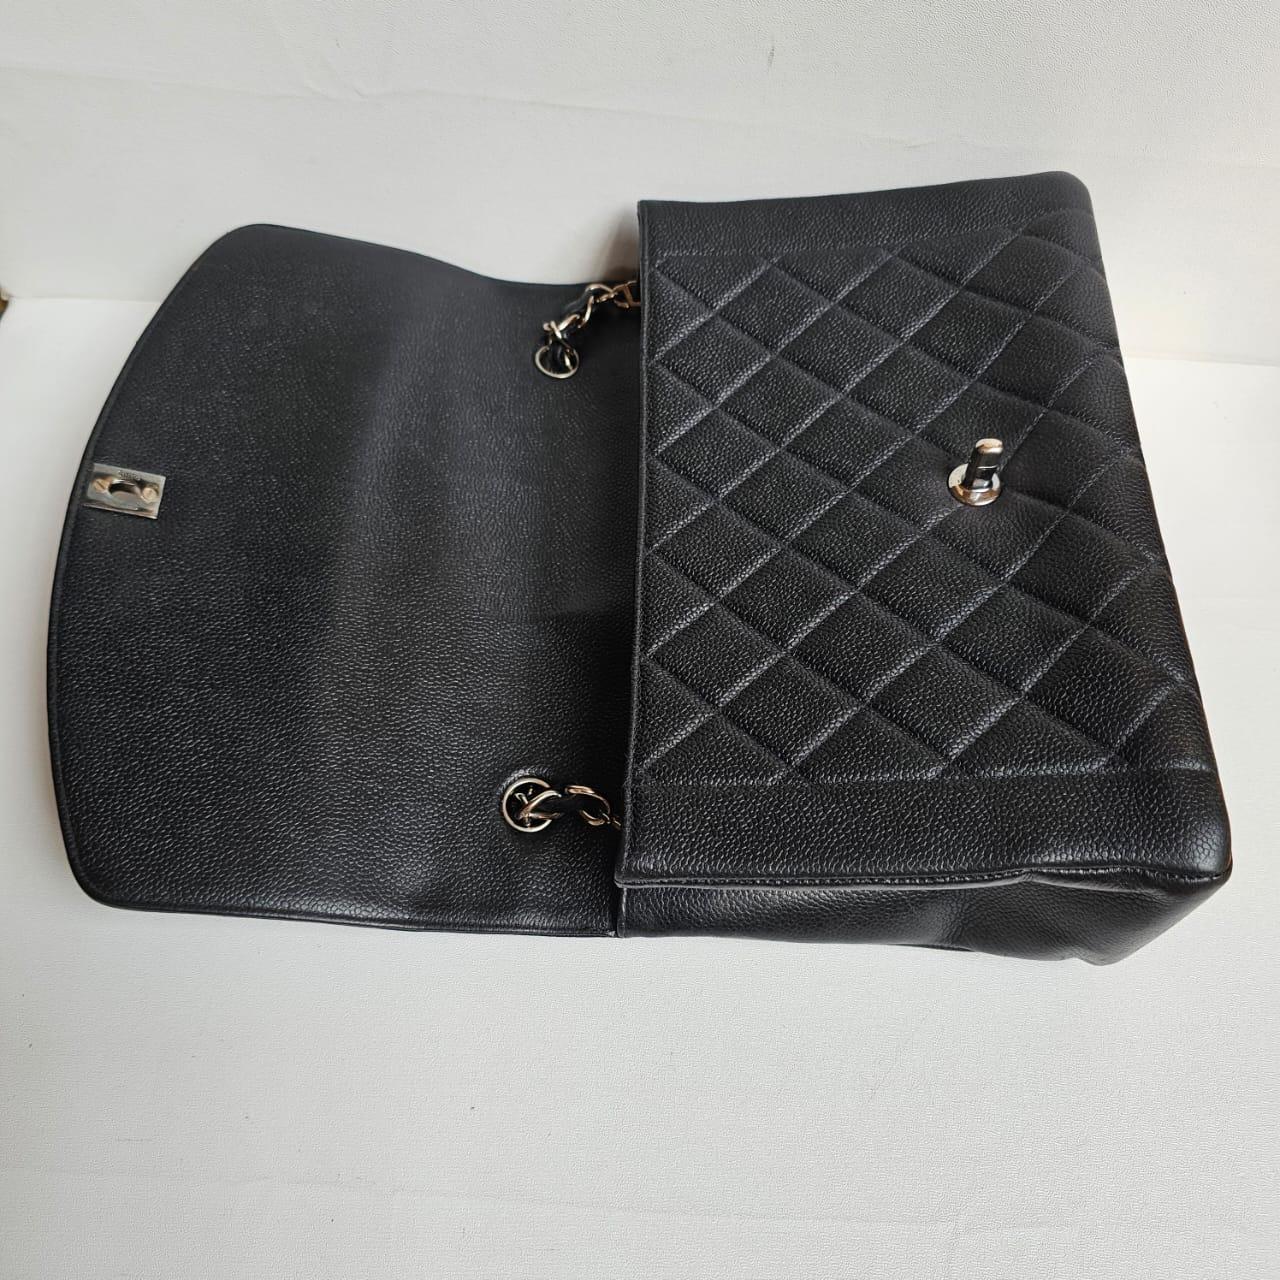 Rare classic diana vintage in black caviar leather with silver hardware. Jumbo size. Perfect crossbody bag, but cannot be worn as double chain (shoulder), needs to be clipped if want to use as shoulder. Overall in good vintage condition, with slight